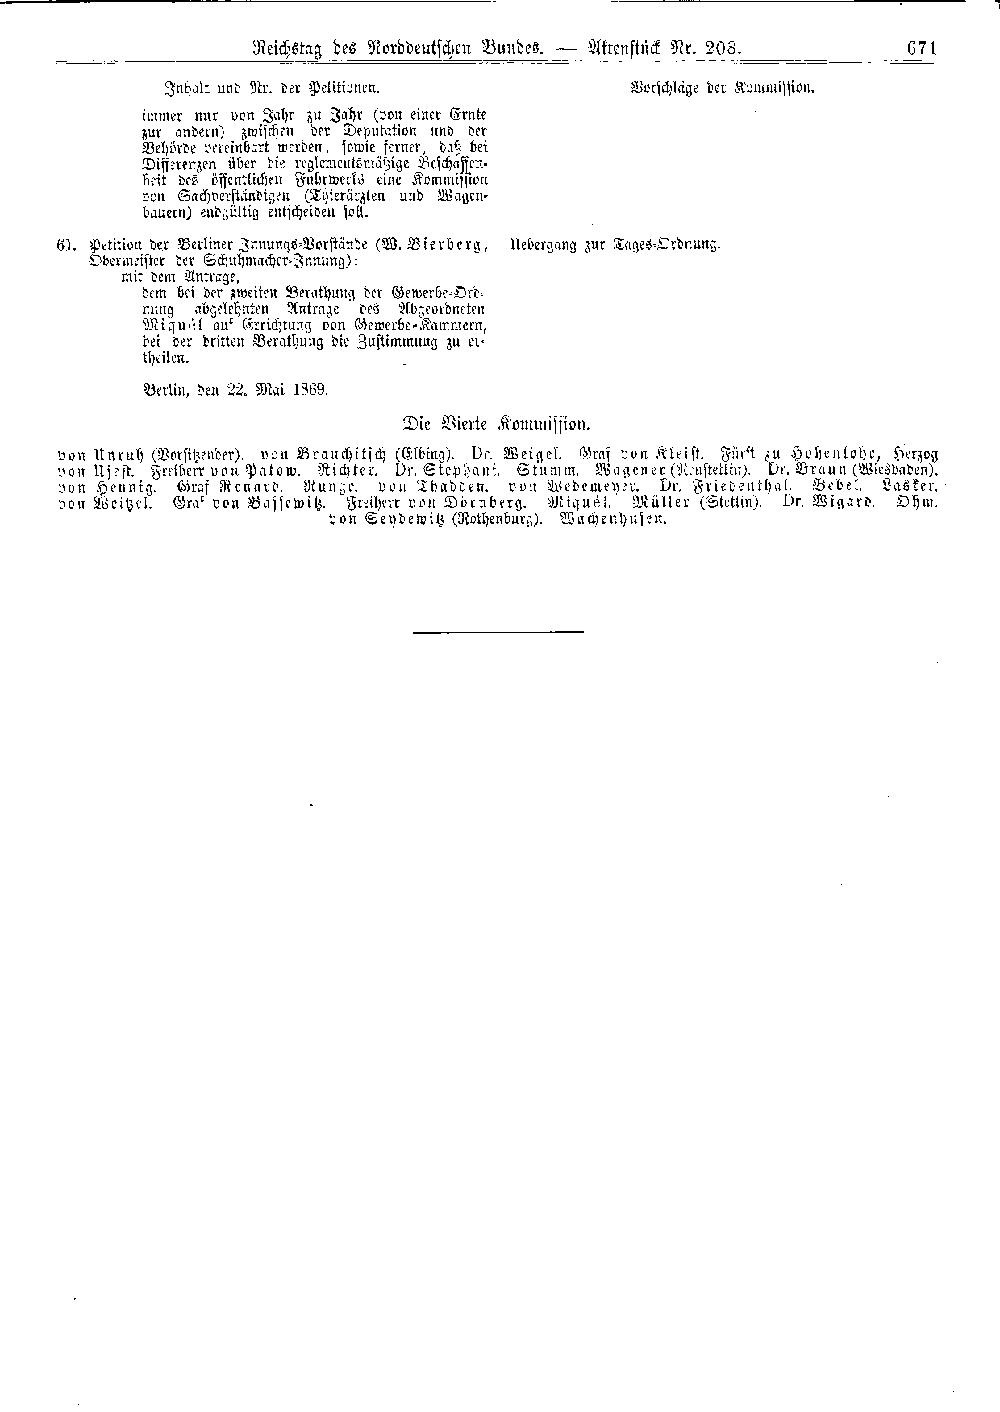 Scan of page 671